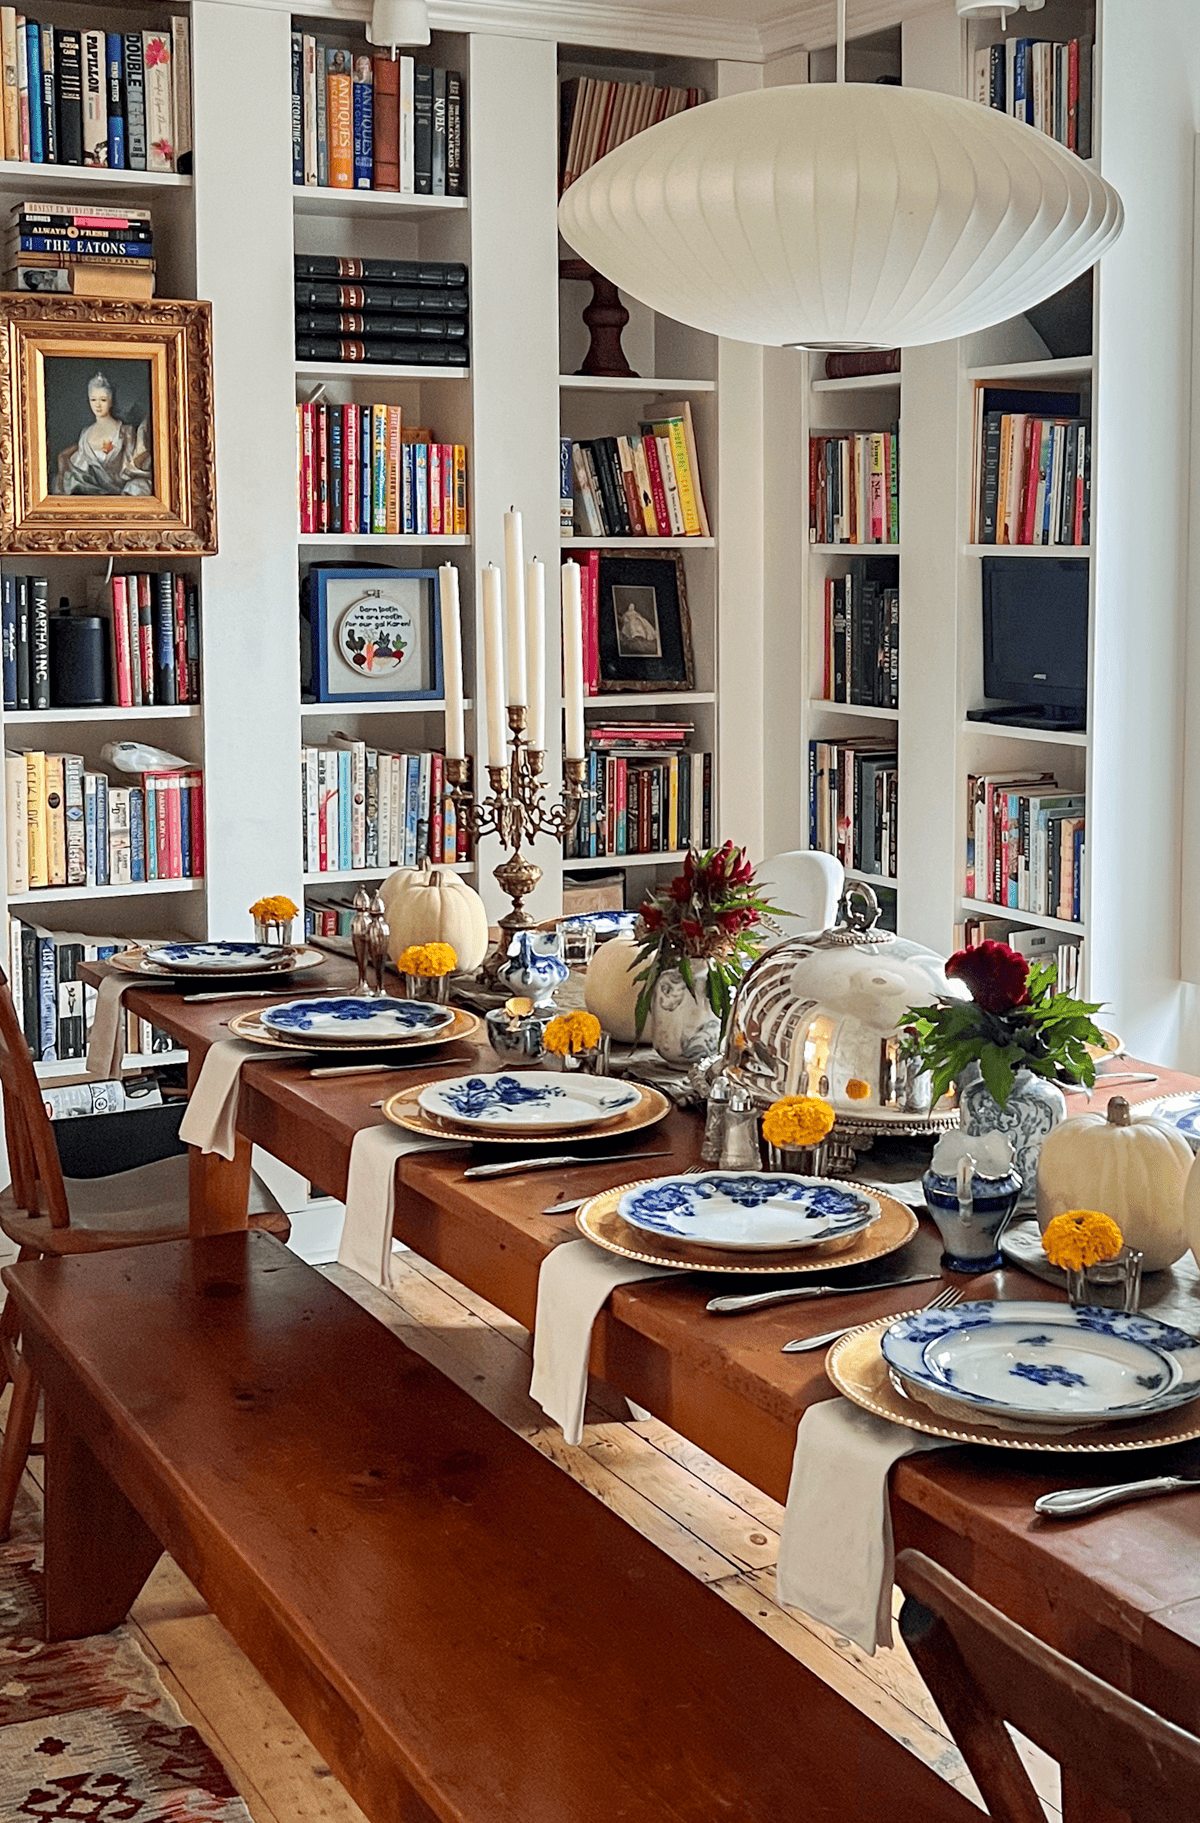 Thanksgiving dinner casual elegant place settings with flow blue and marigolds.